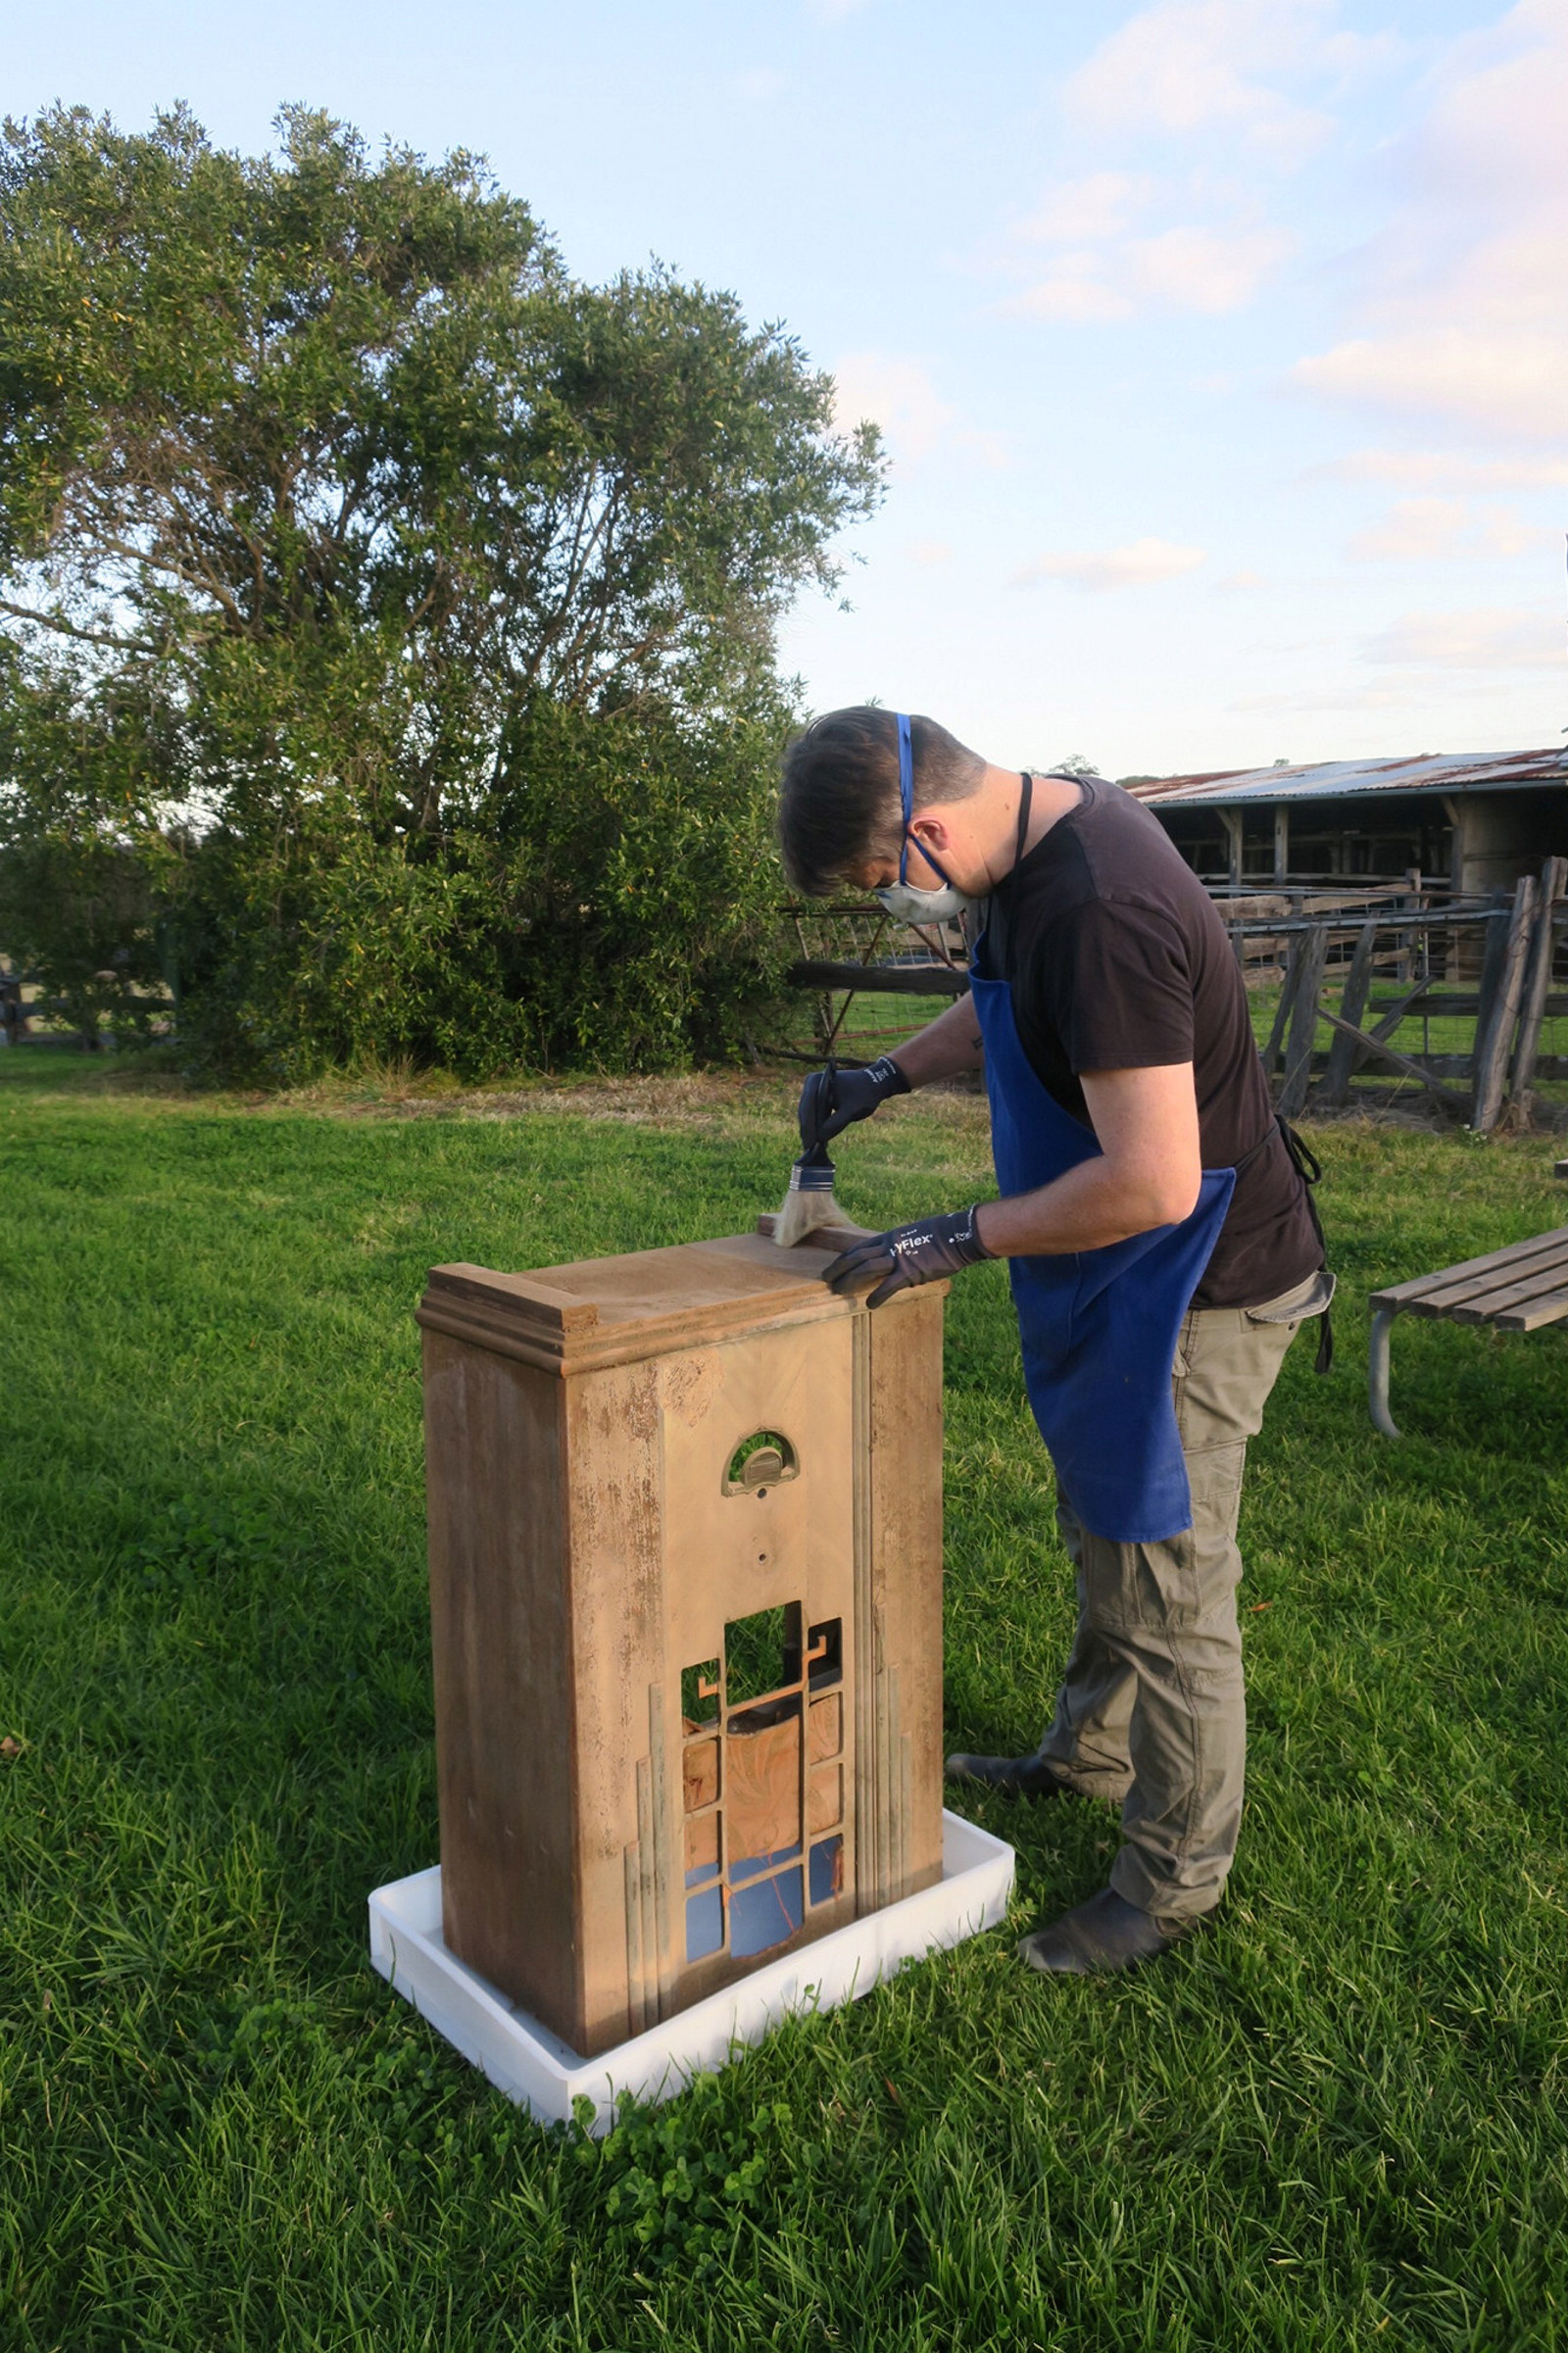 Outdoors shot of man cleaning wooden radio cabinet.